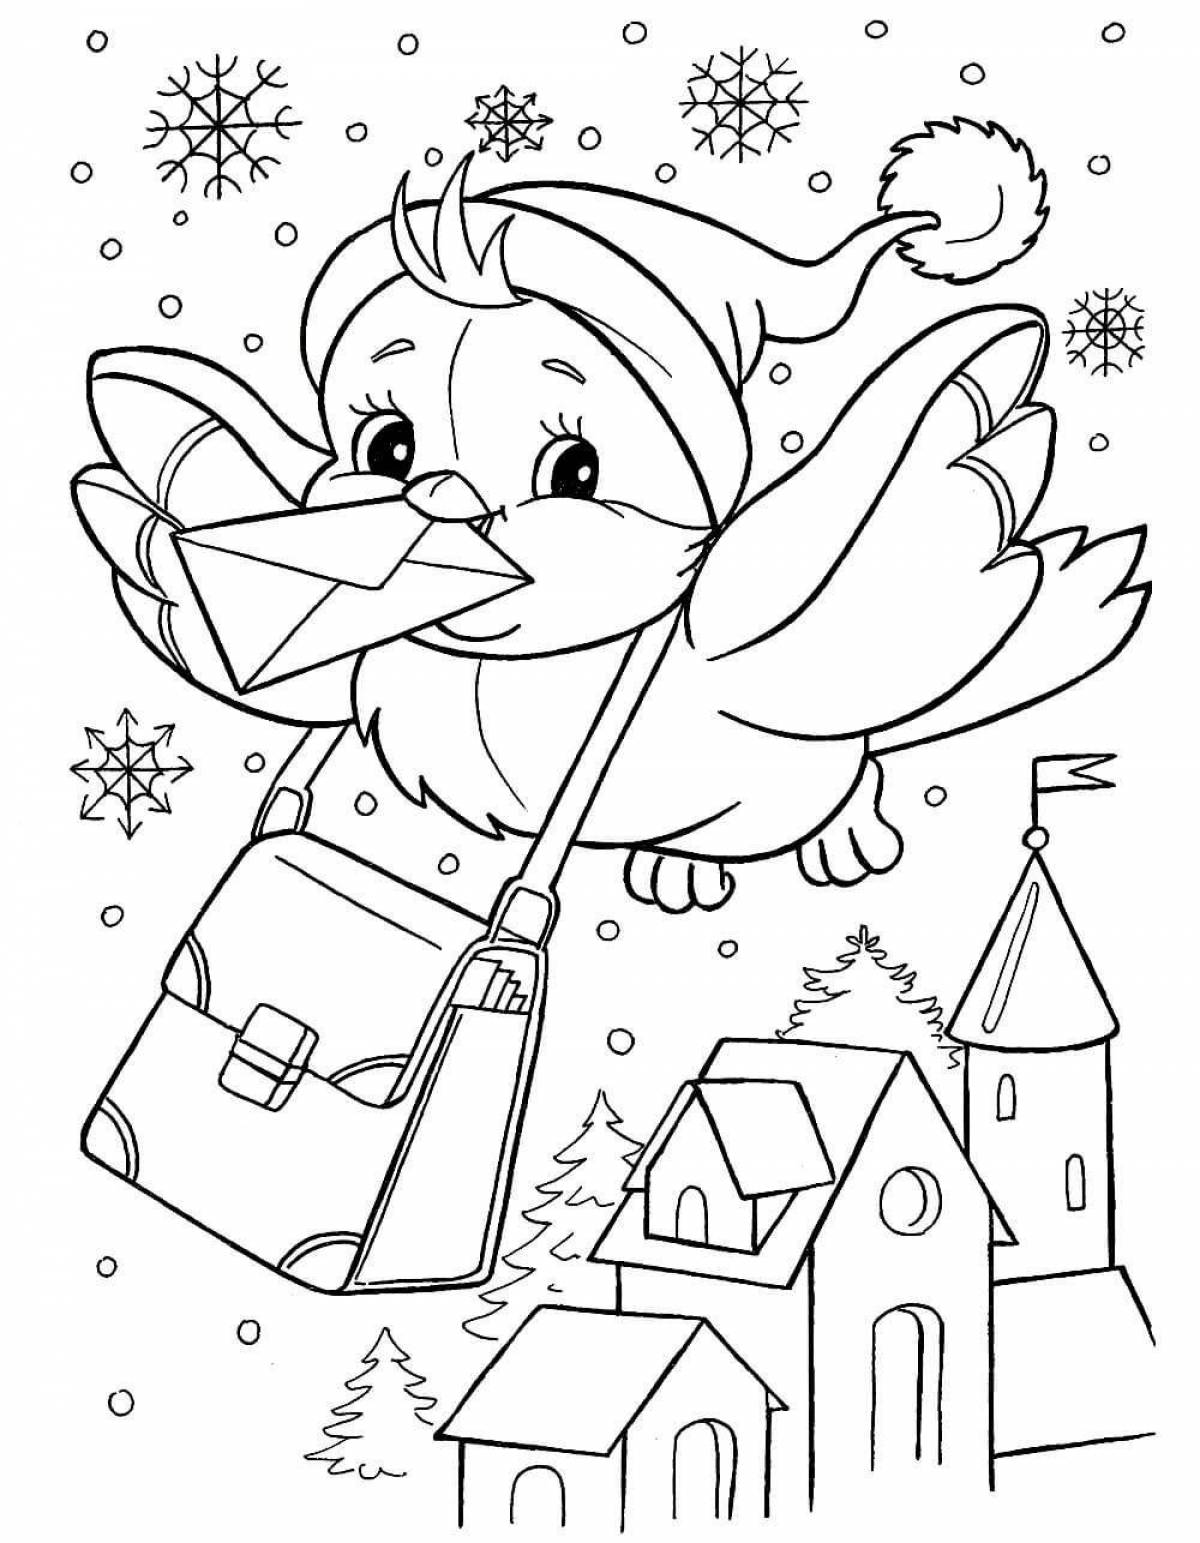 Cute winter coloring book for kids 6-7 years old